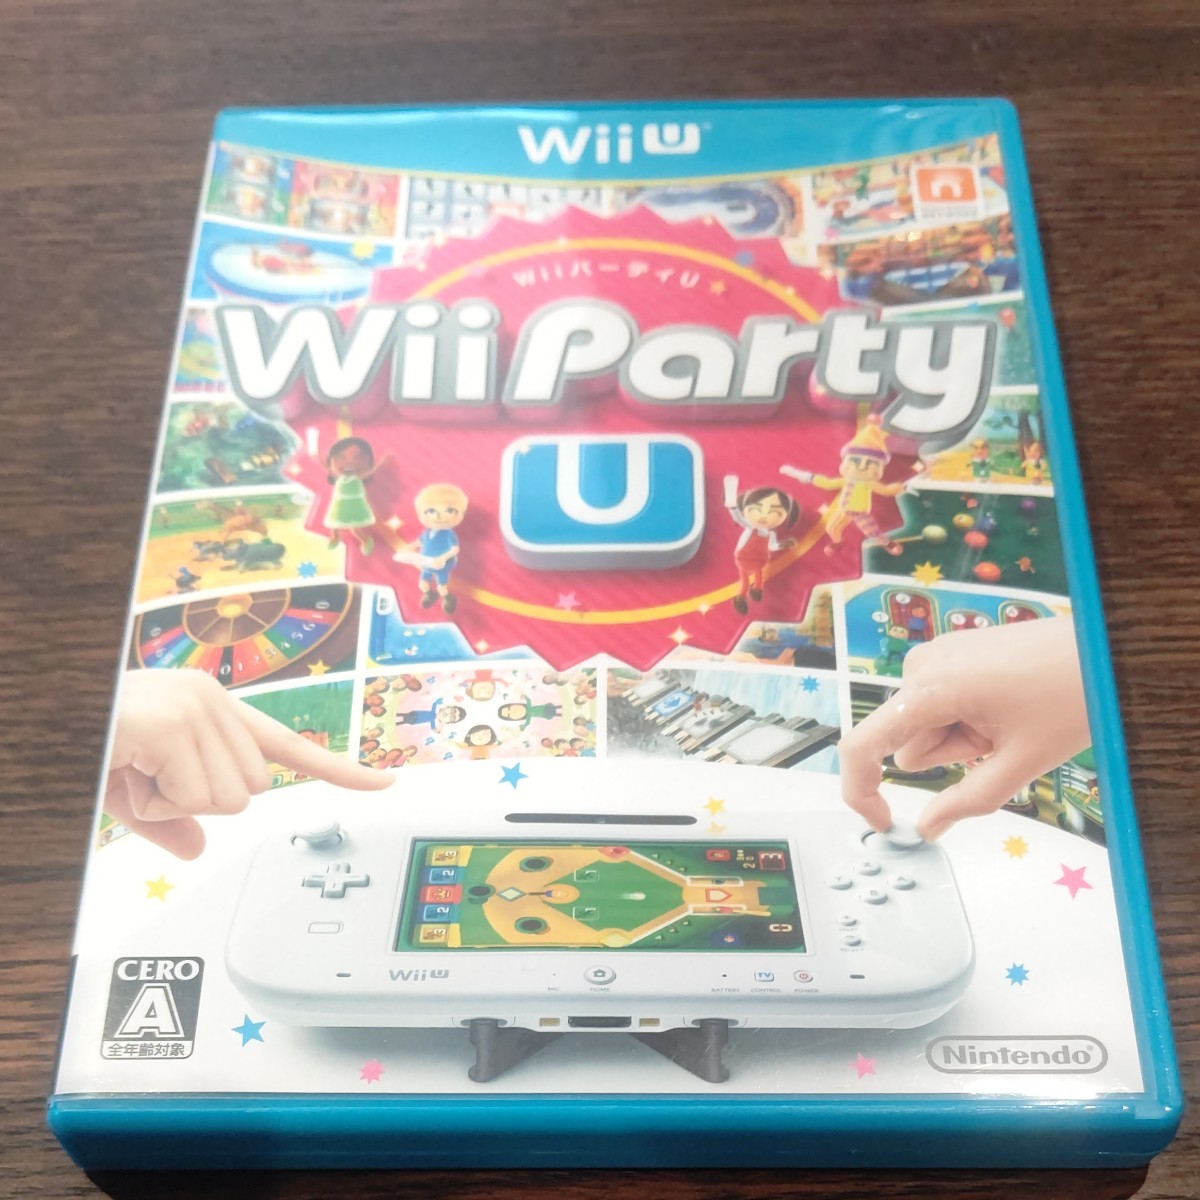 WiiパーティU Wii Party U ソフト